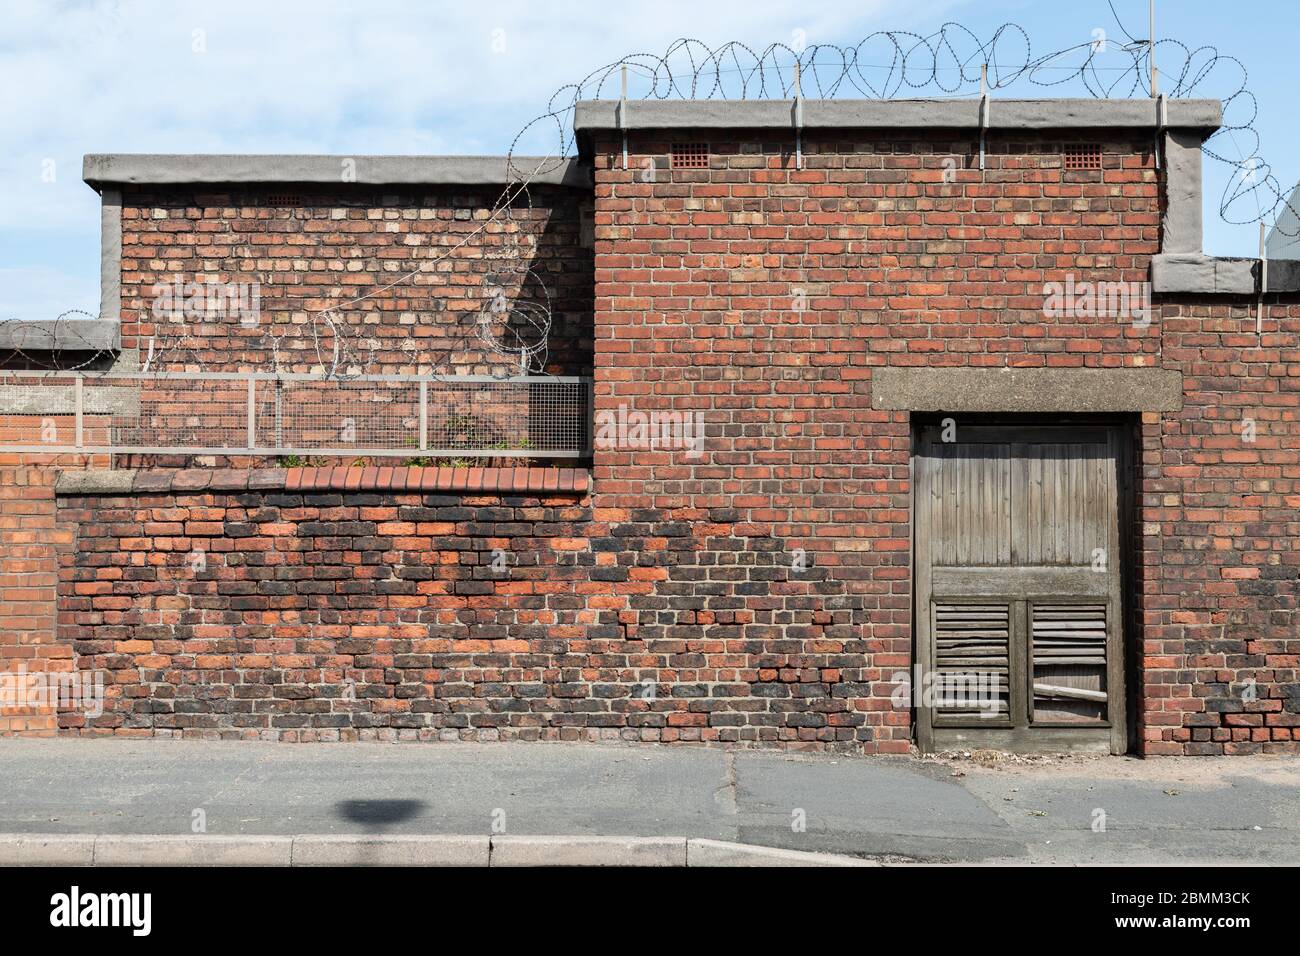 Exterior of brick building with barbed wire in Wallasey Wirral August 2019 Stock Photo